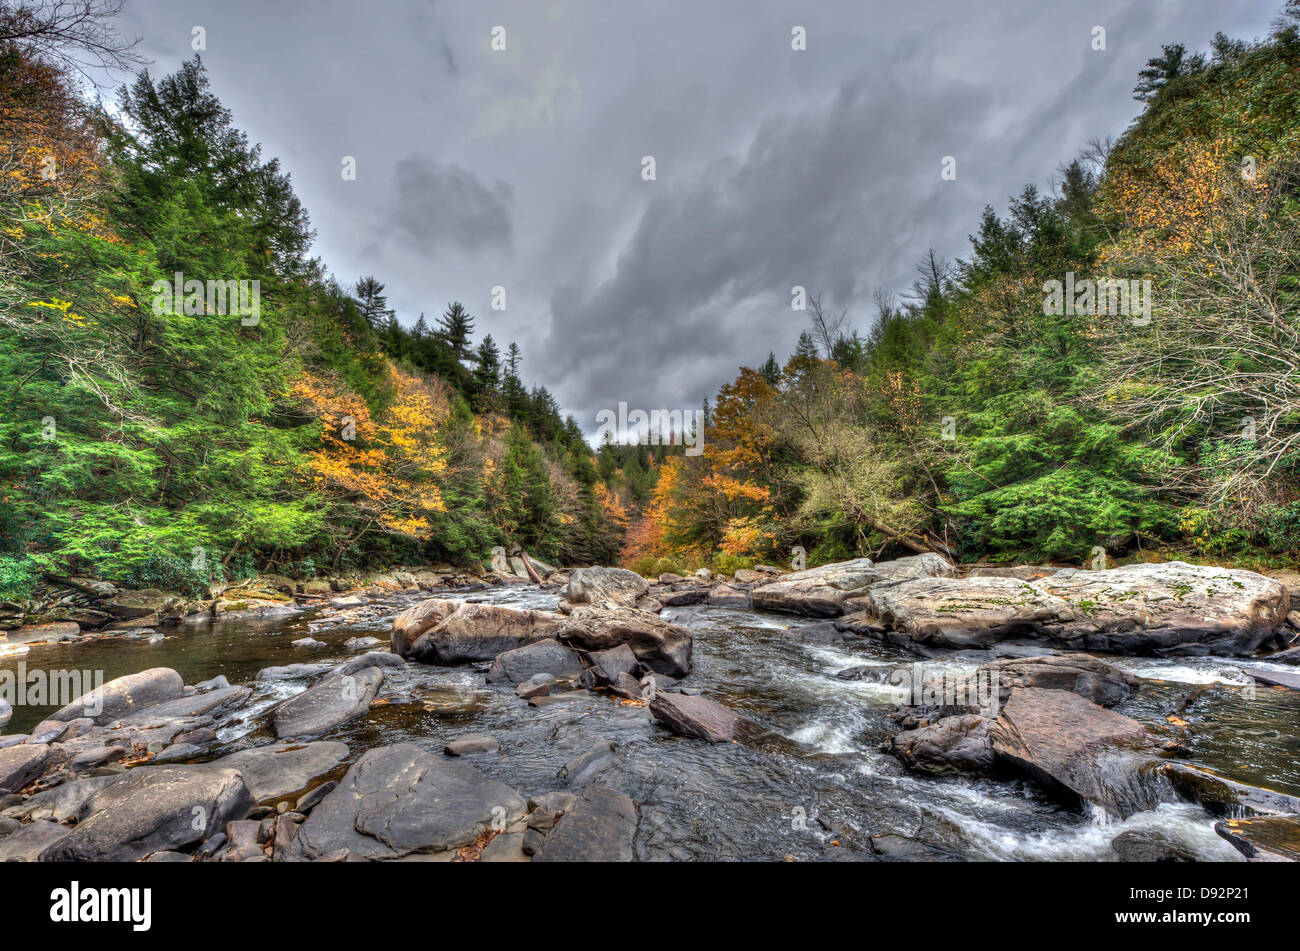 A wild river in the Appalachian mountains during Autumn Stock Photo